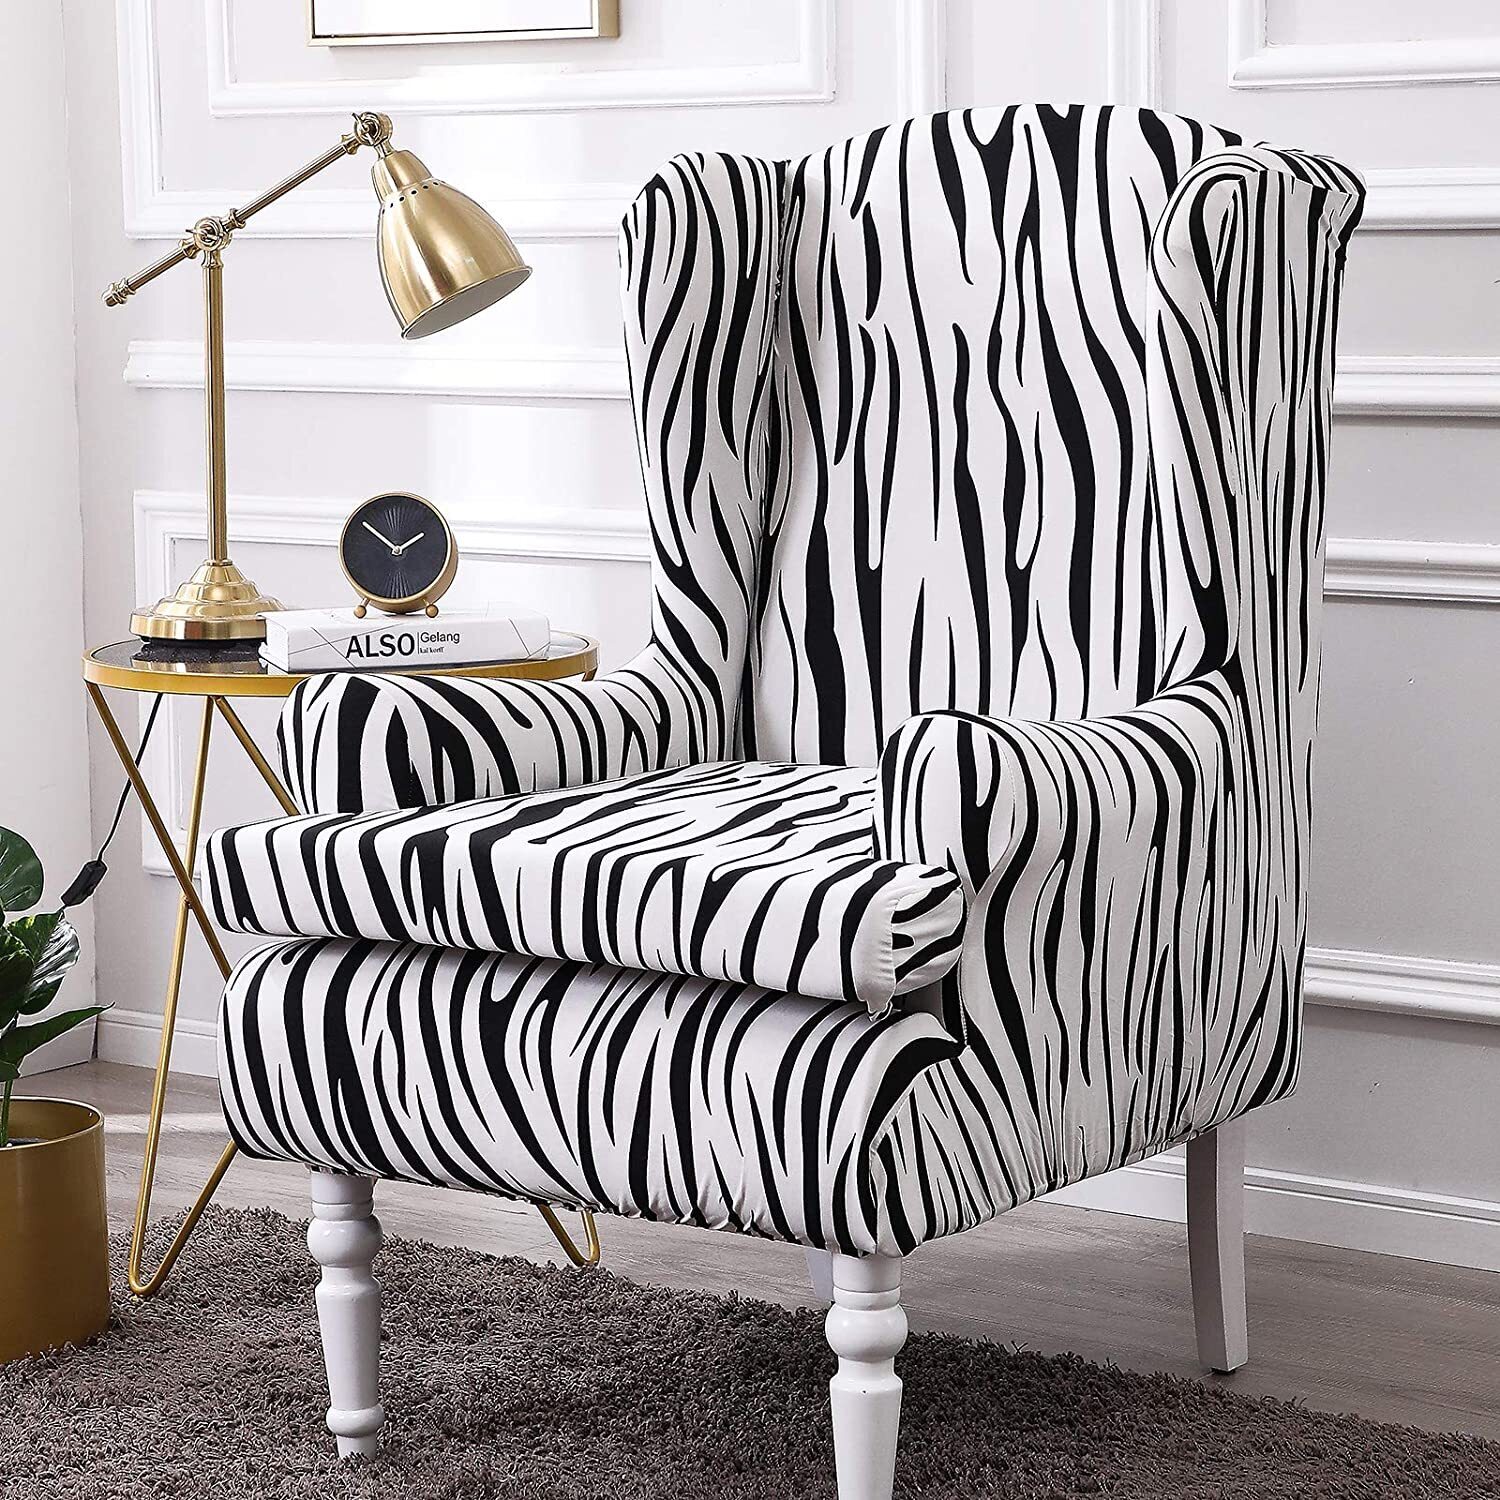 Traditional Zebra Patterned Armchair